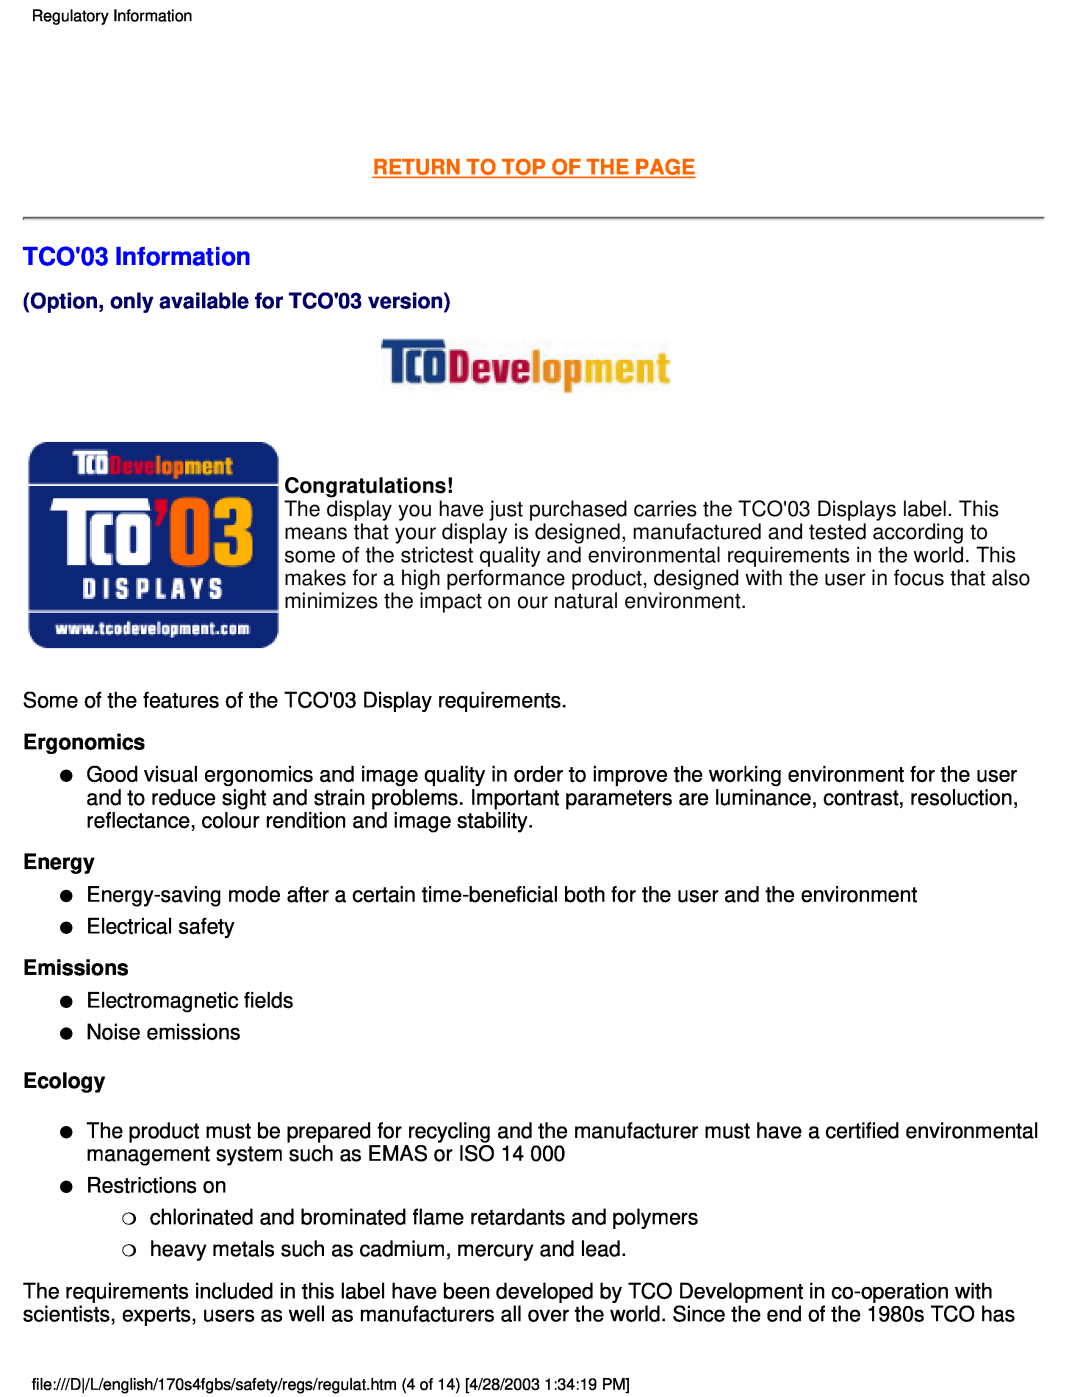 Philips 170S4FG TCO03 Information, Return To Top Of The Page, Option, only available for TCO03 version, Congratulations 